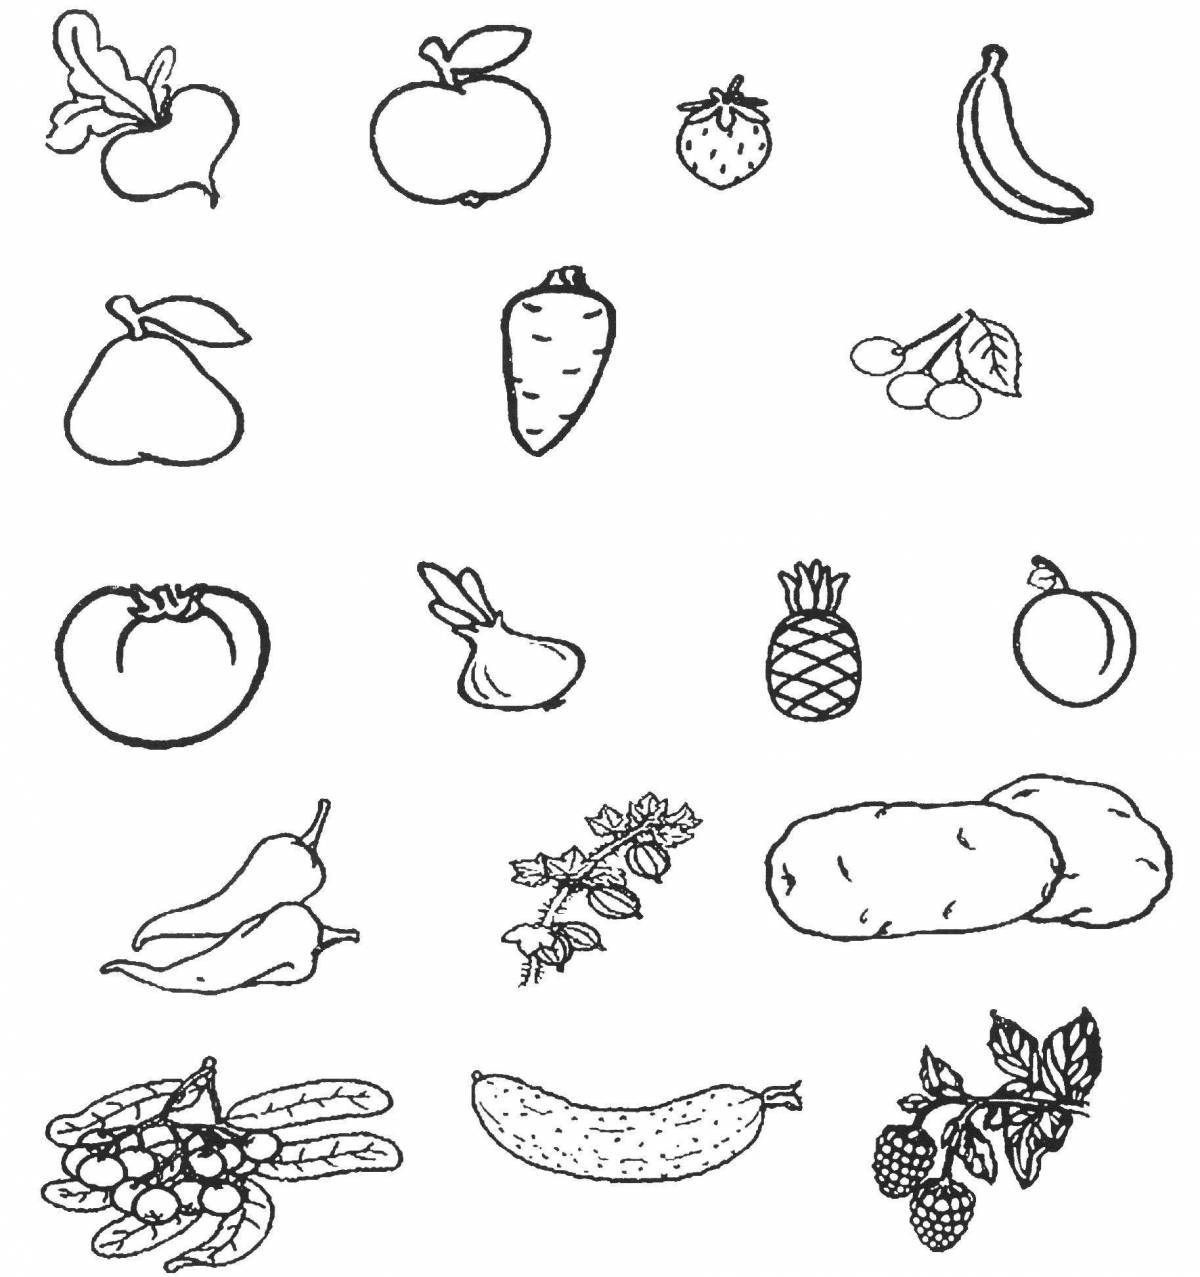 Colorful fruits and vegetables coloring pages for kids